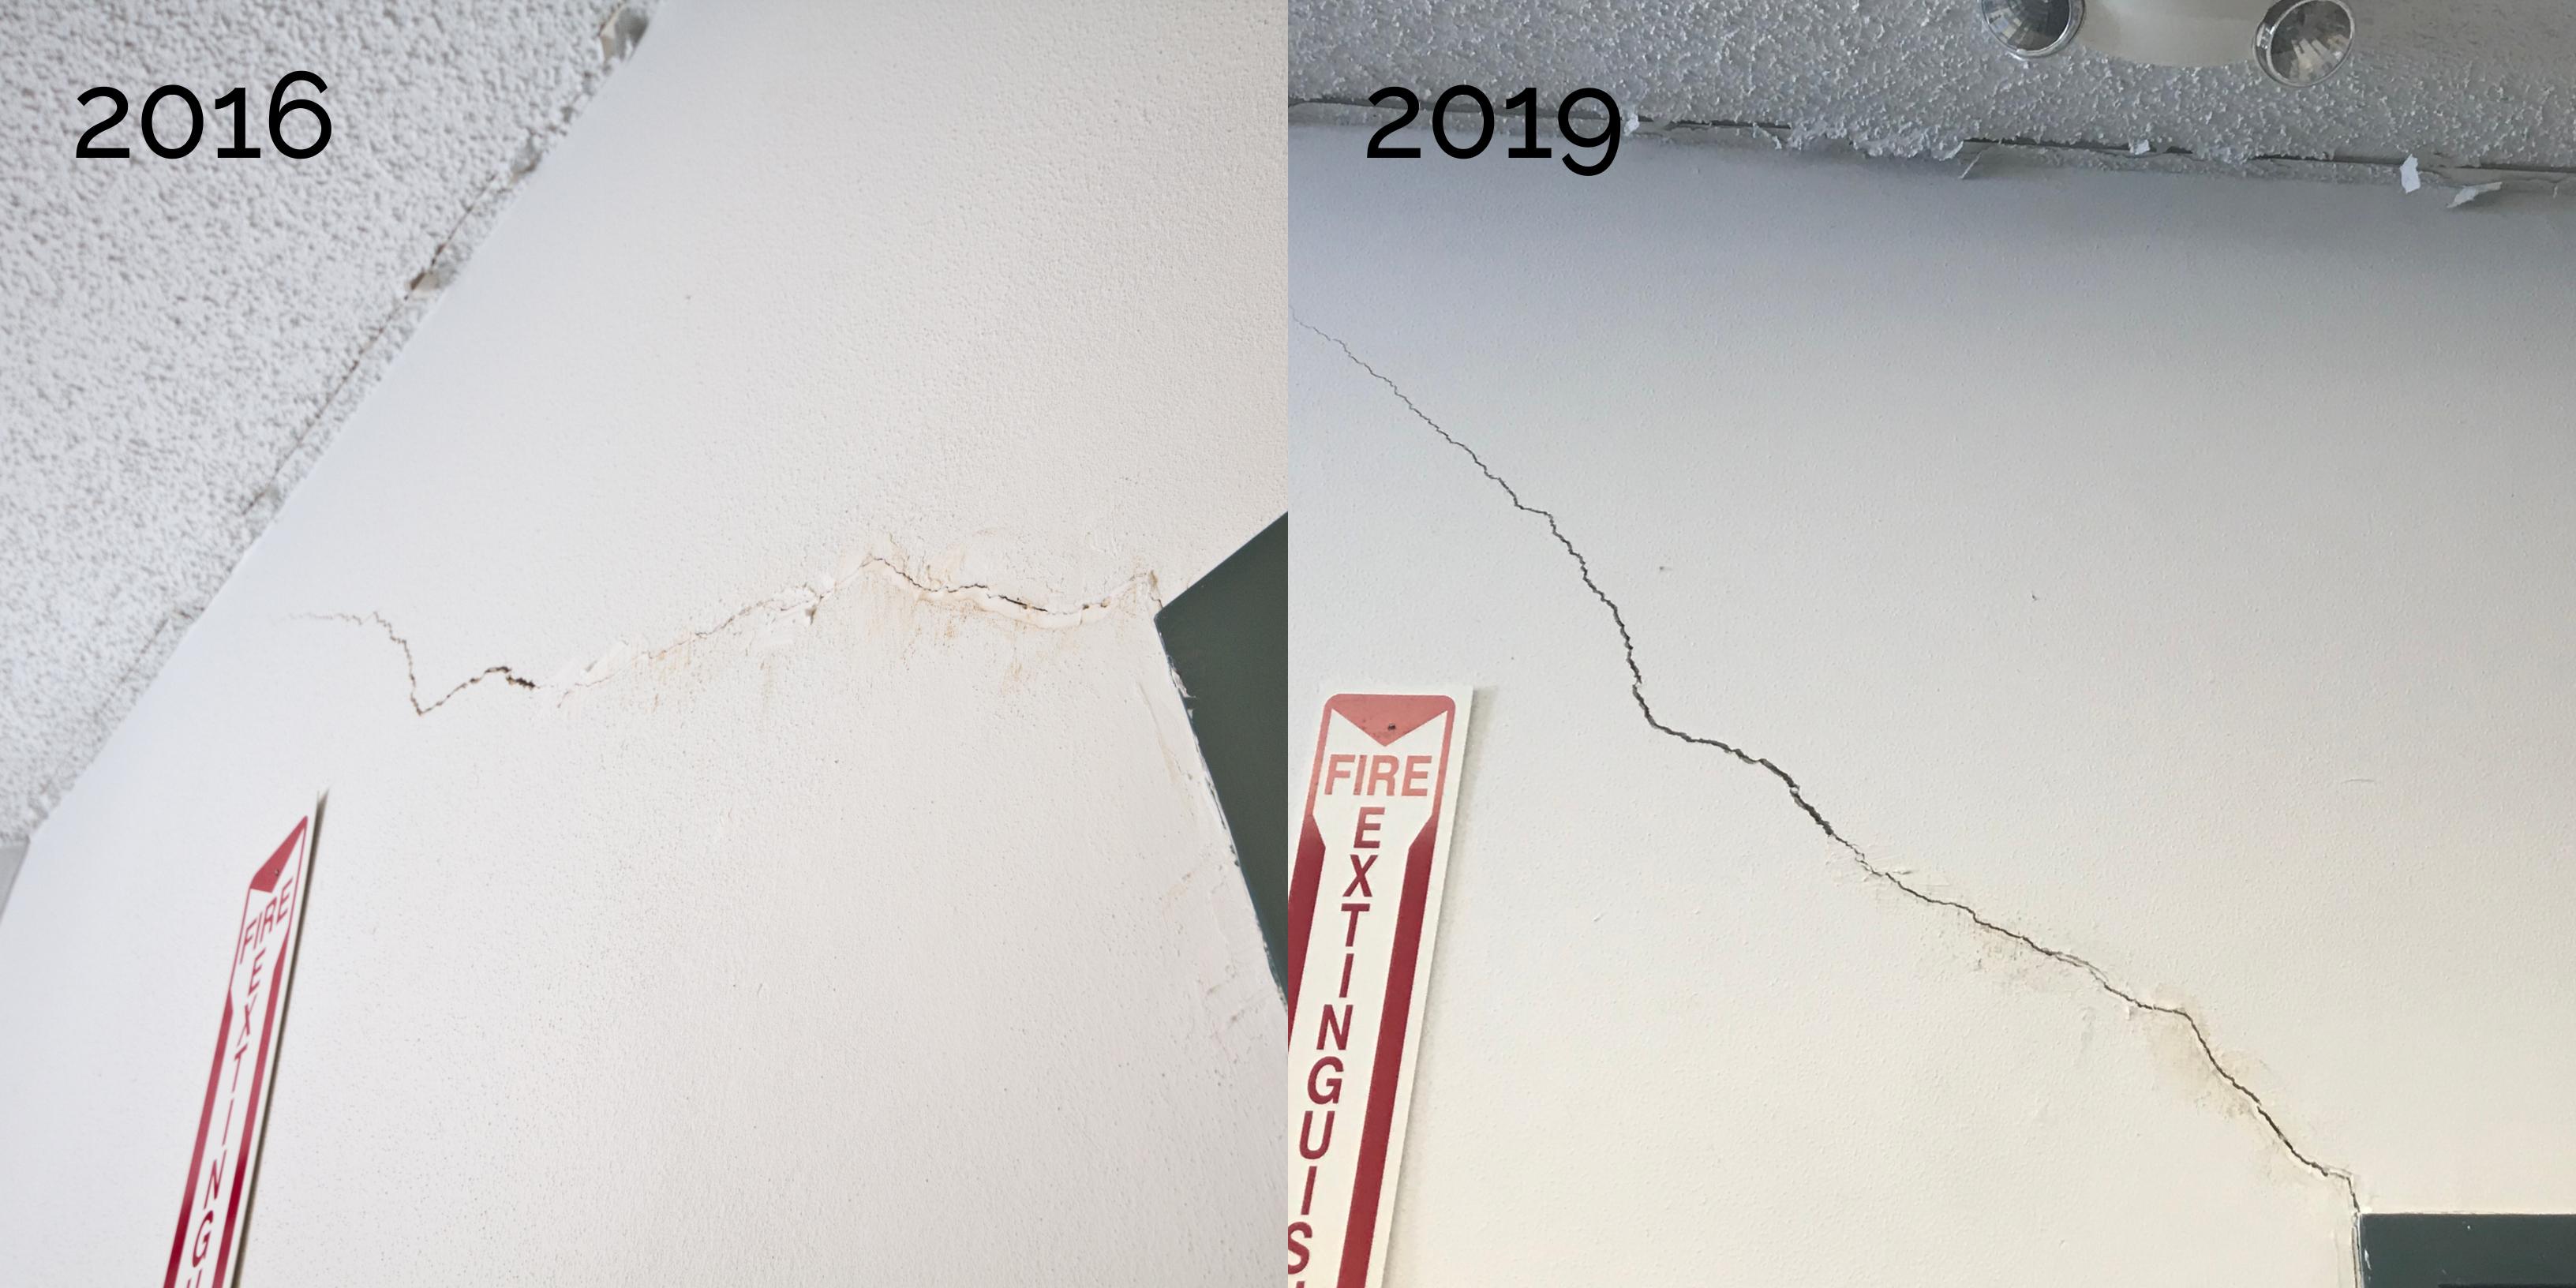 Wall crack comparison between 2015 and 2019 showing the spread of a crack